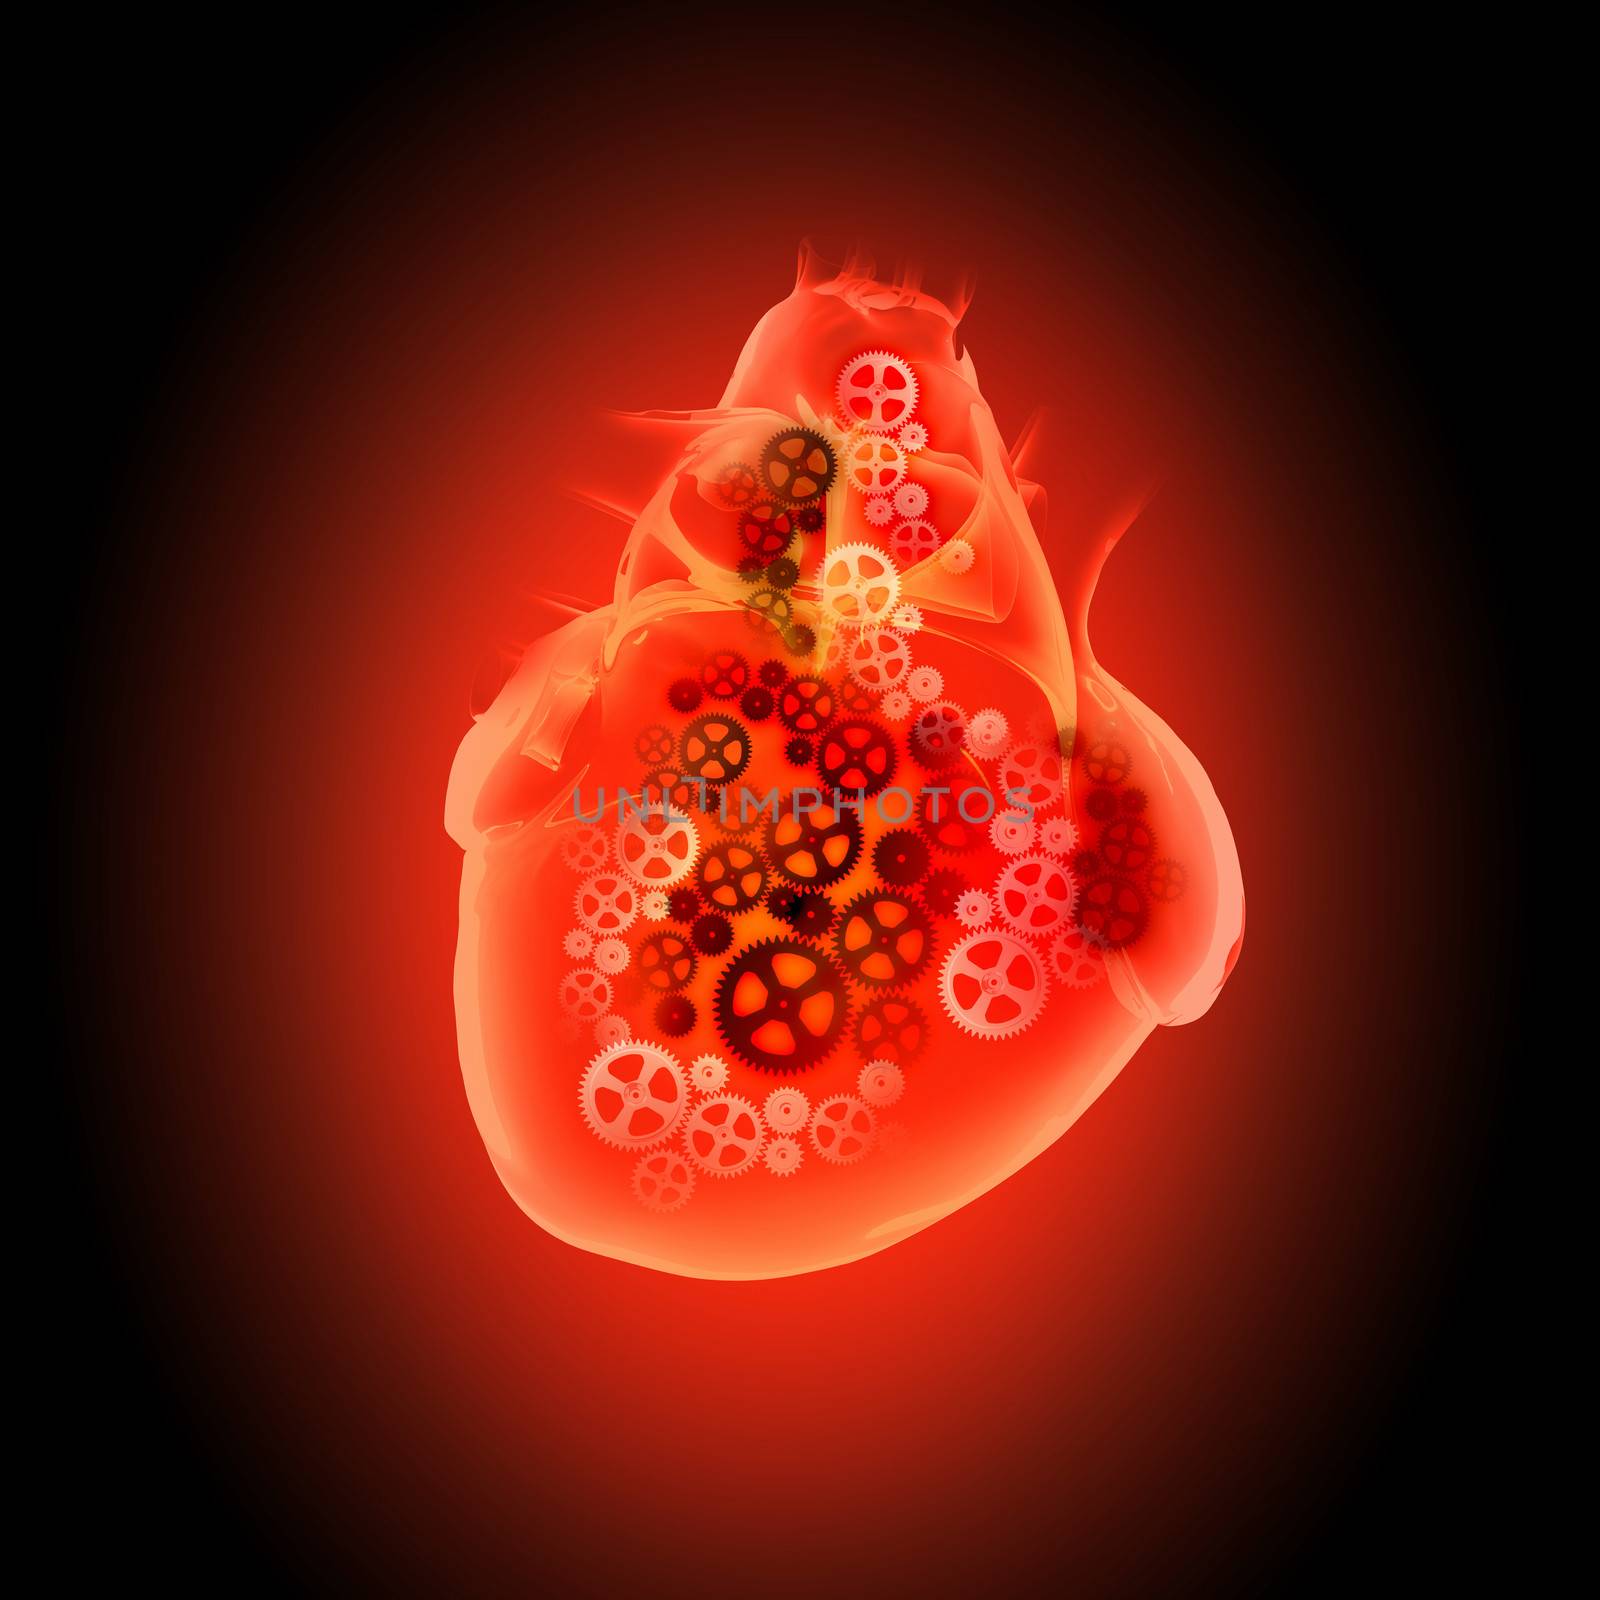 Human heart with cog and gear mechanisms against black background